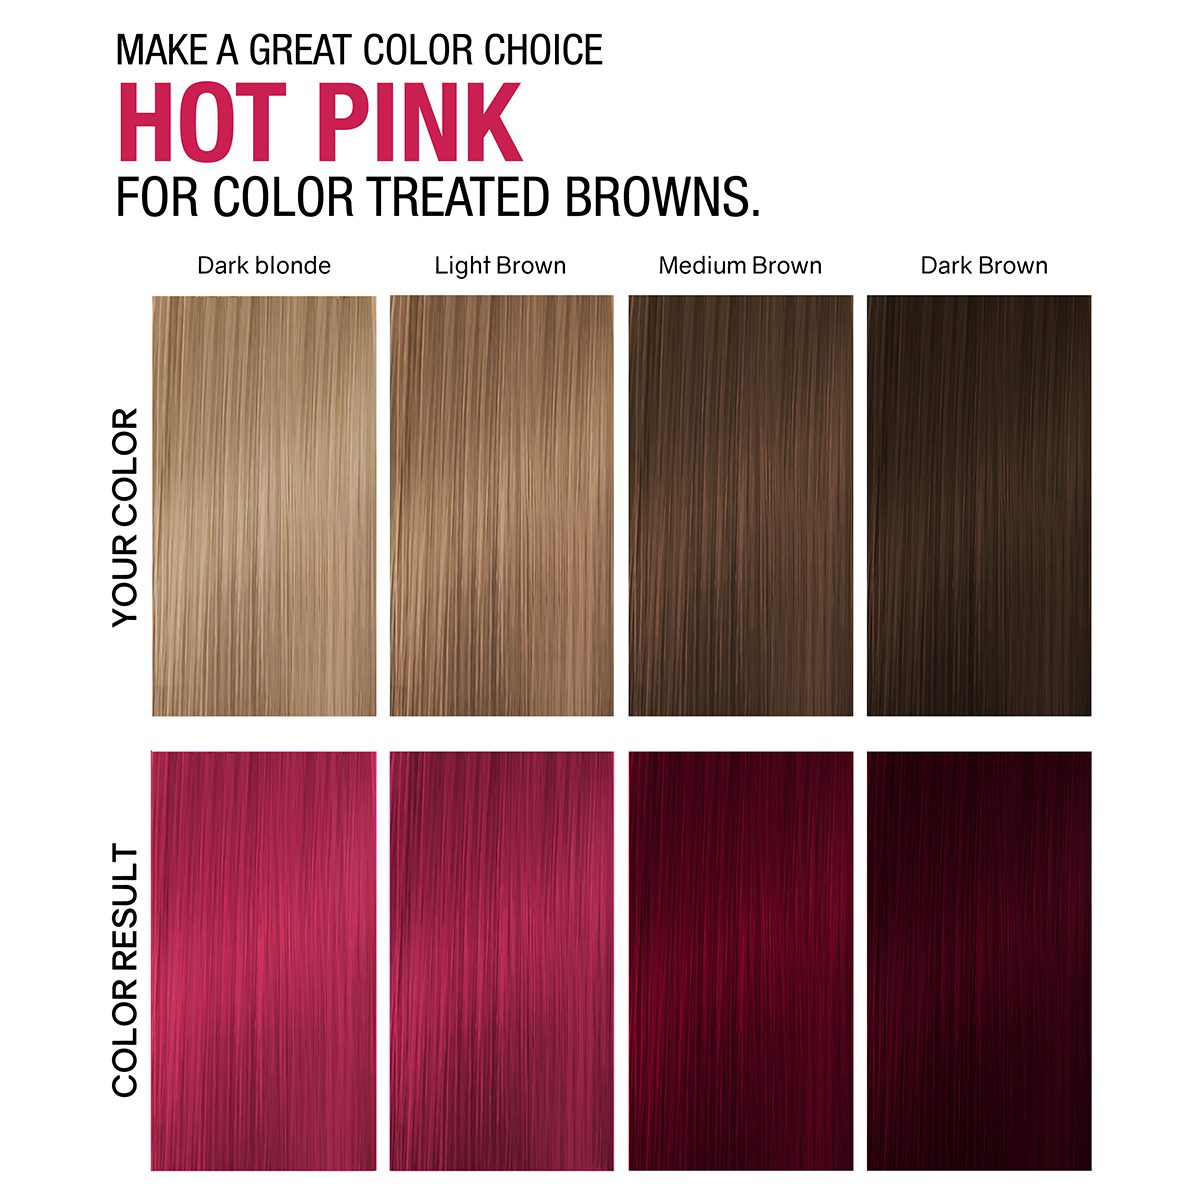 Hot Pink for color treated browns.